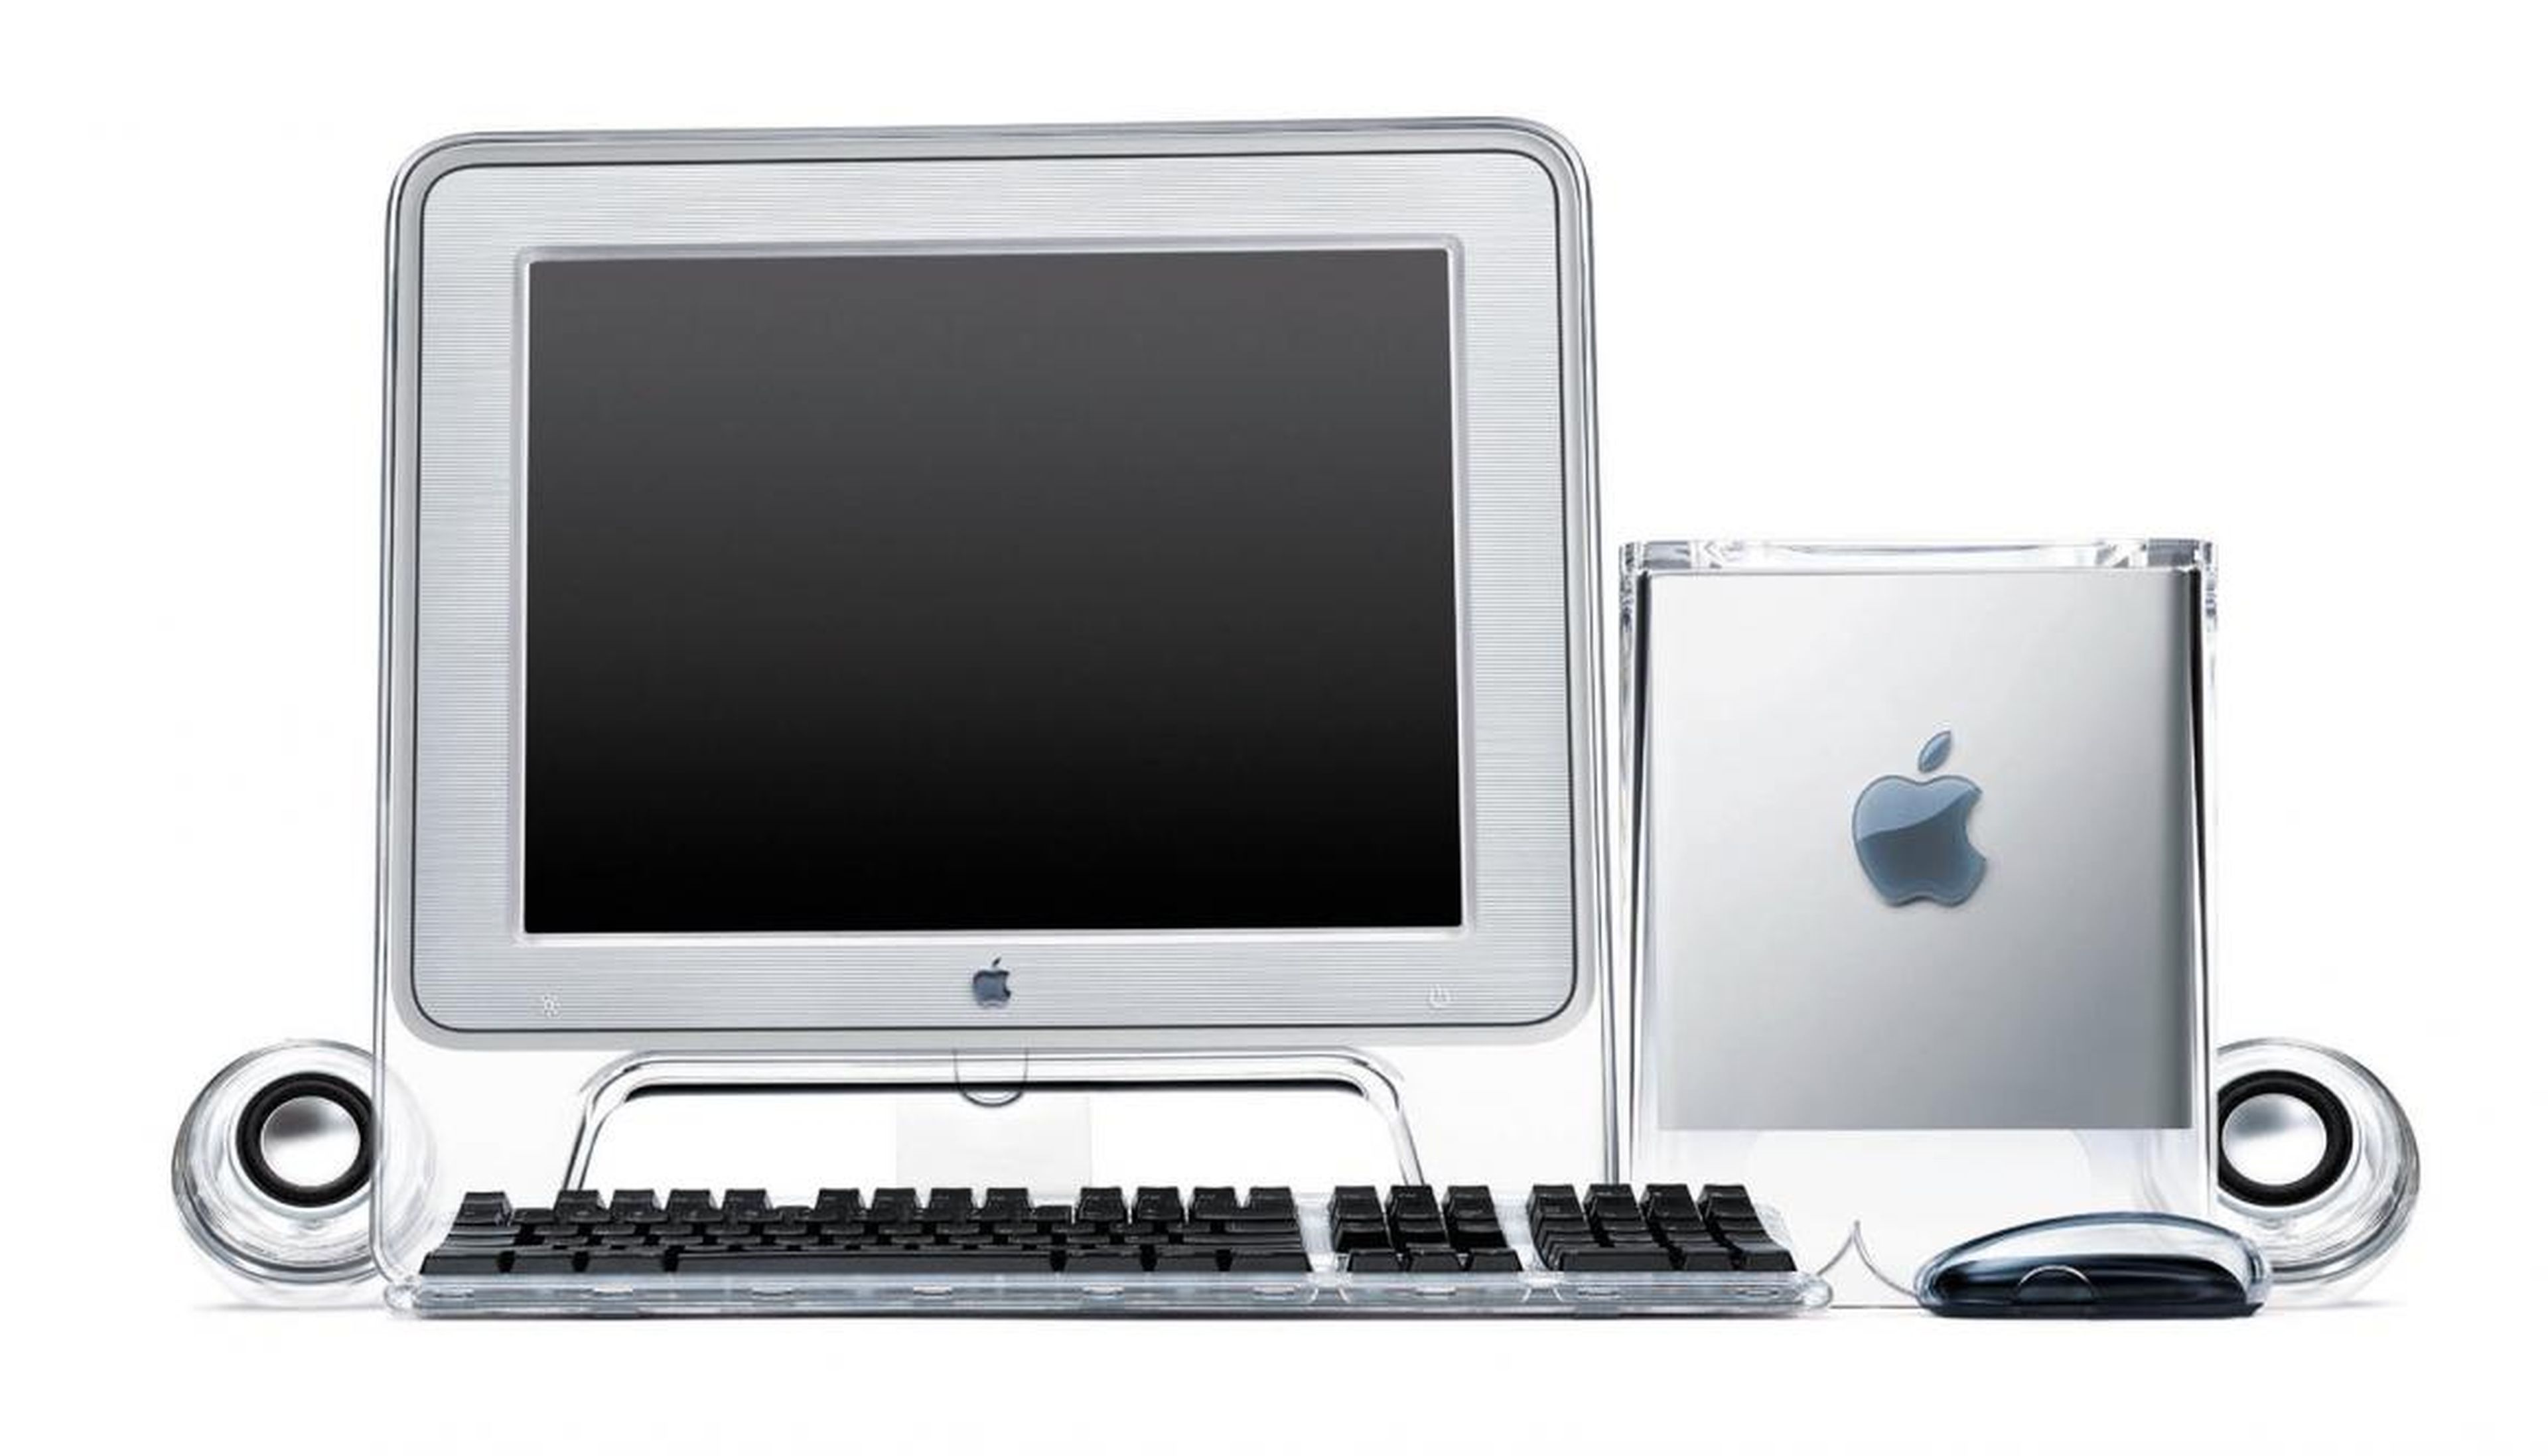 The Power Mac G4 Cube, another Ive design, wasn't quite the same sales sensation, but it reinforced Apple's reputation for making good-looking computers that stood out against the bland beige boxes that characterized the PC